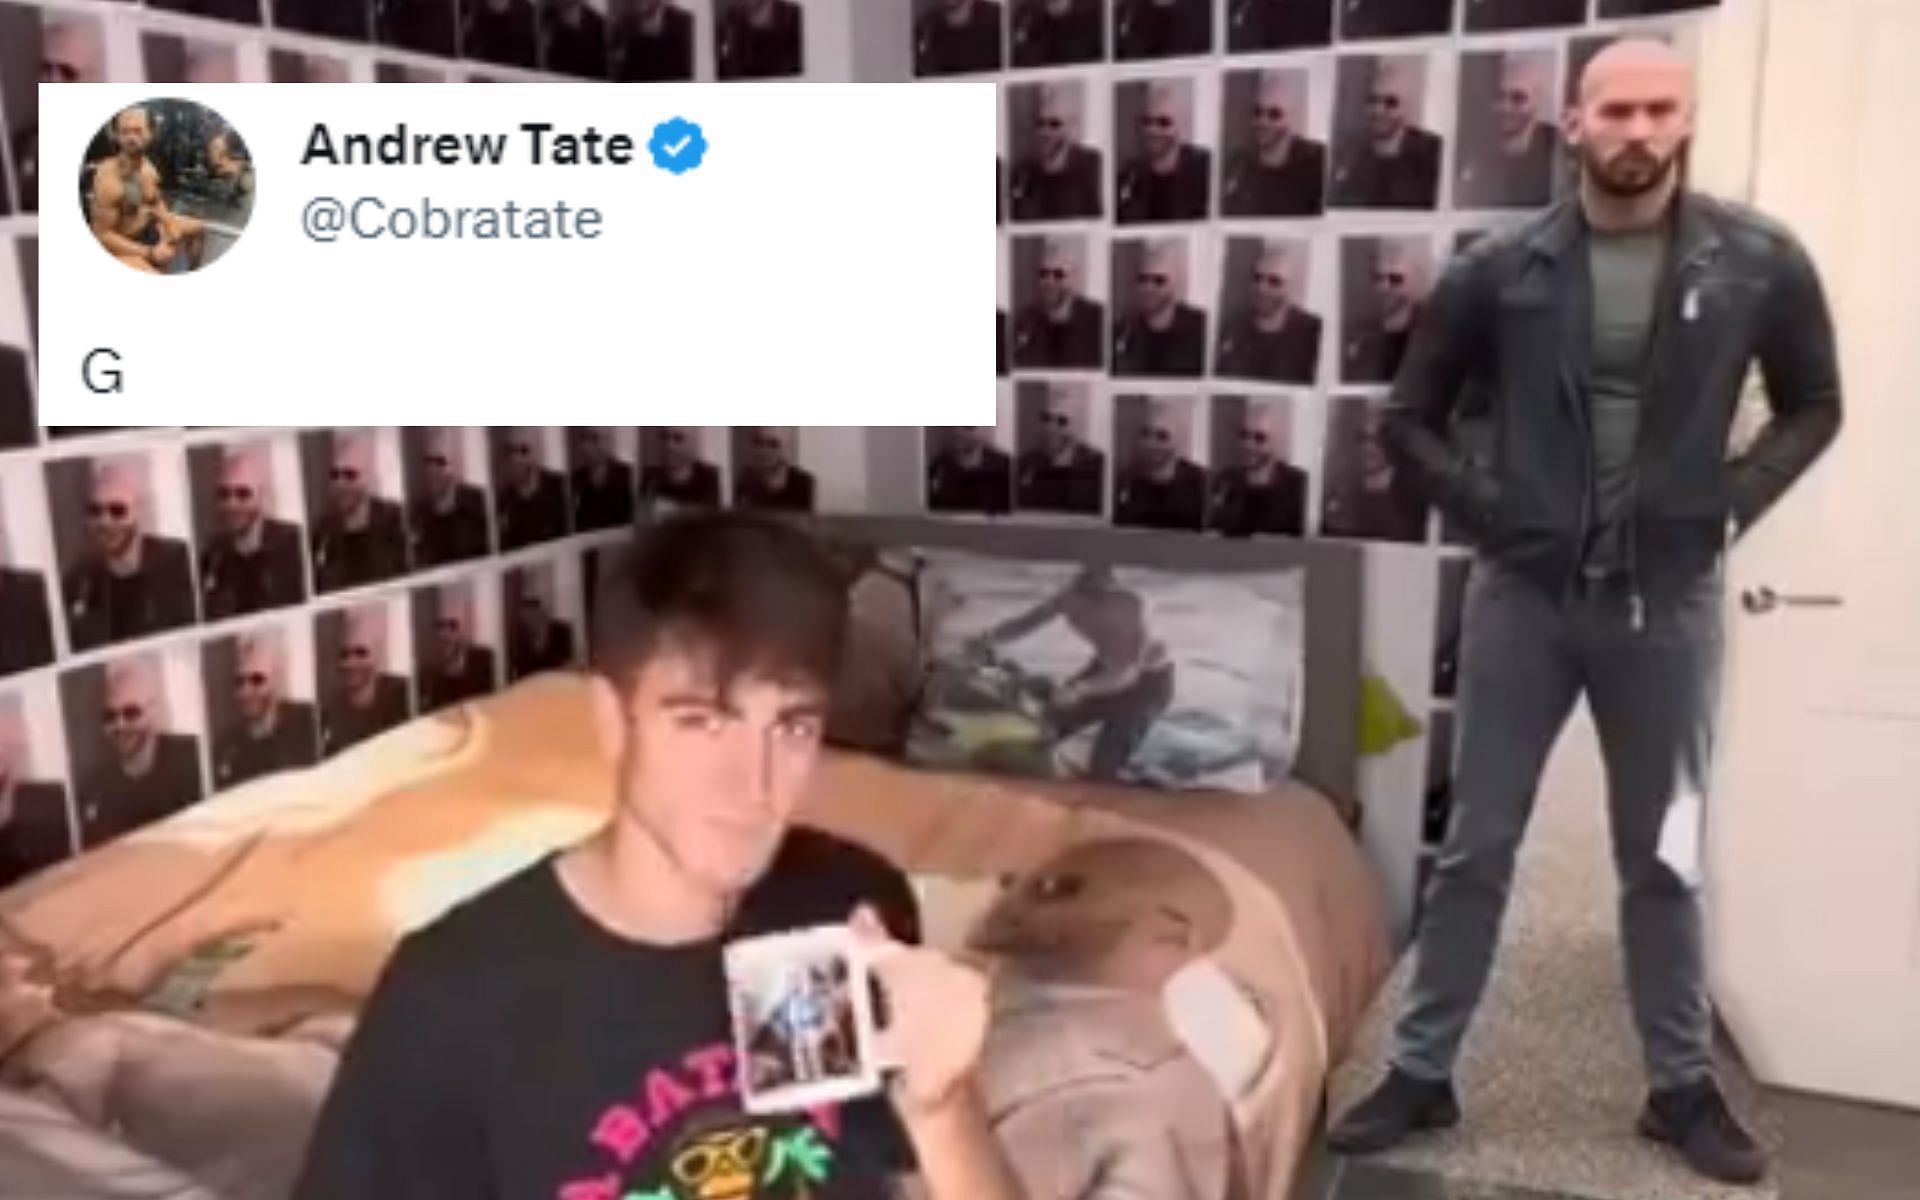 This Andrew Tate-themed room has stunned people [Image Credit: http://twitter.com/NoContextHumans]